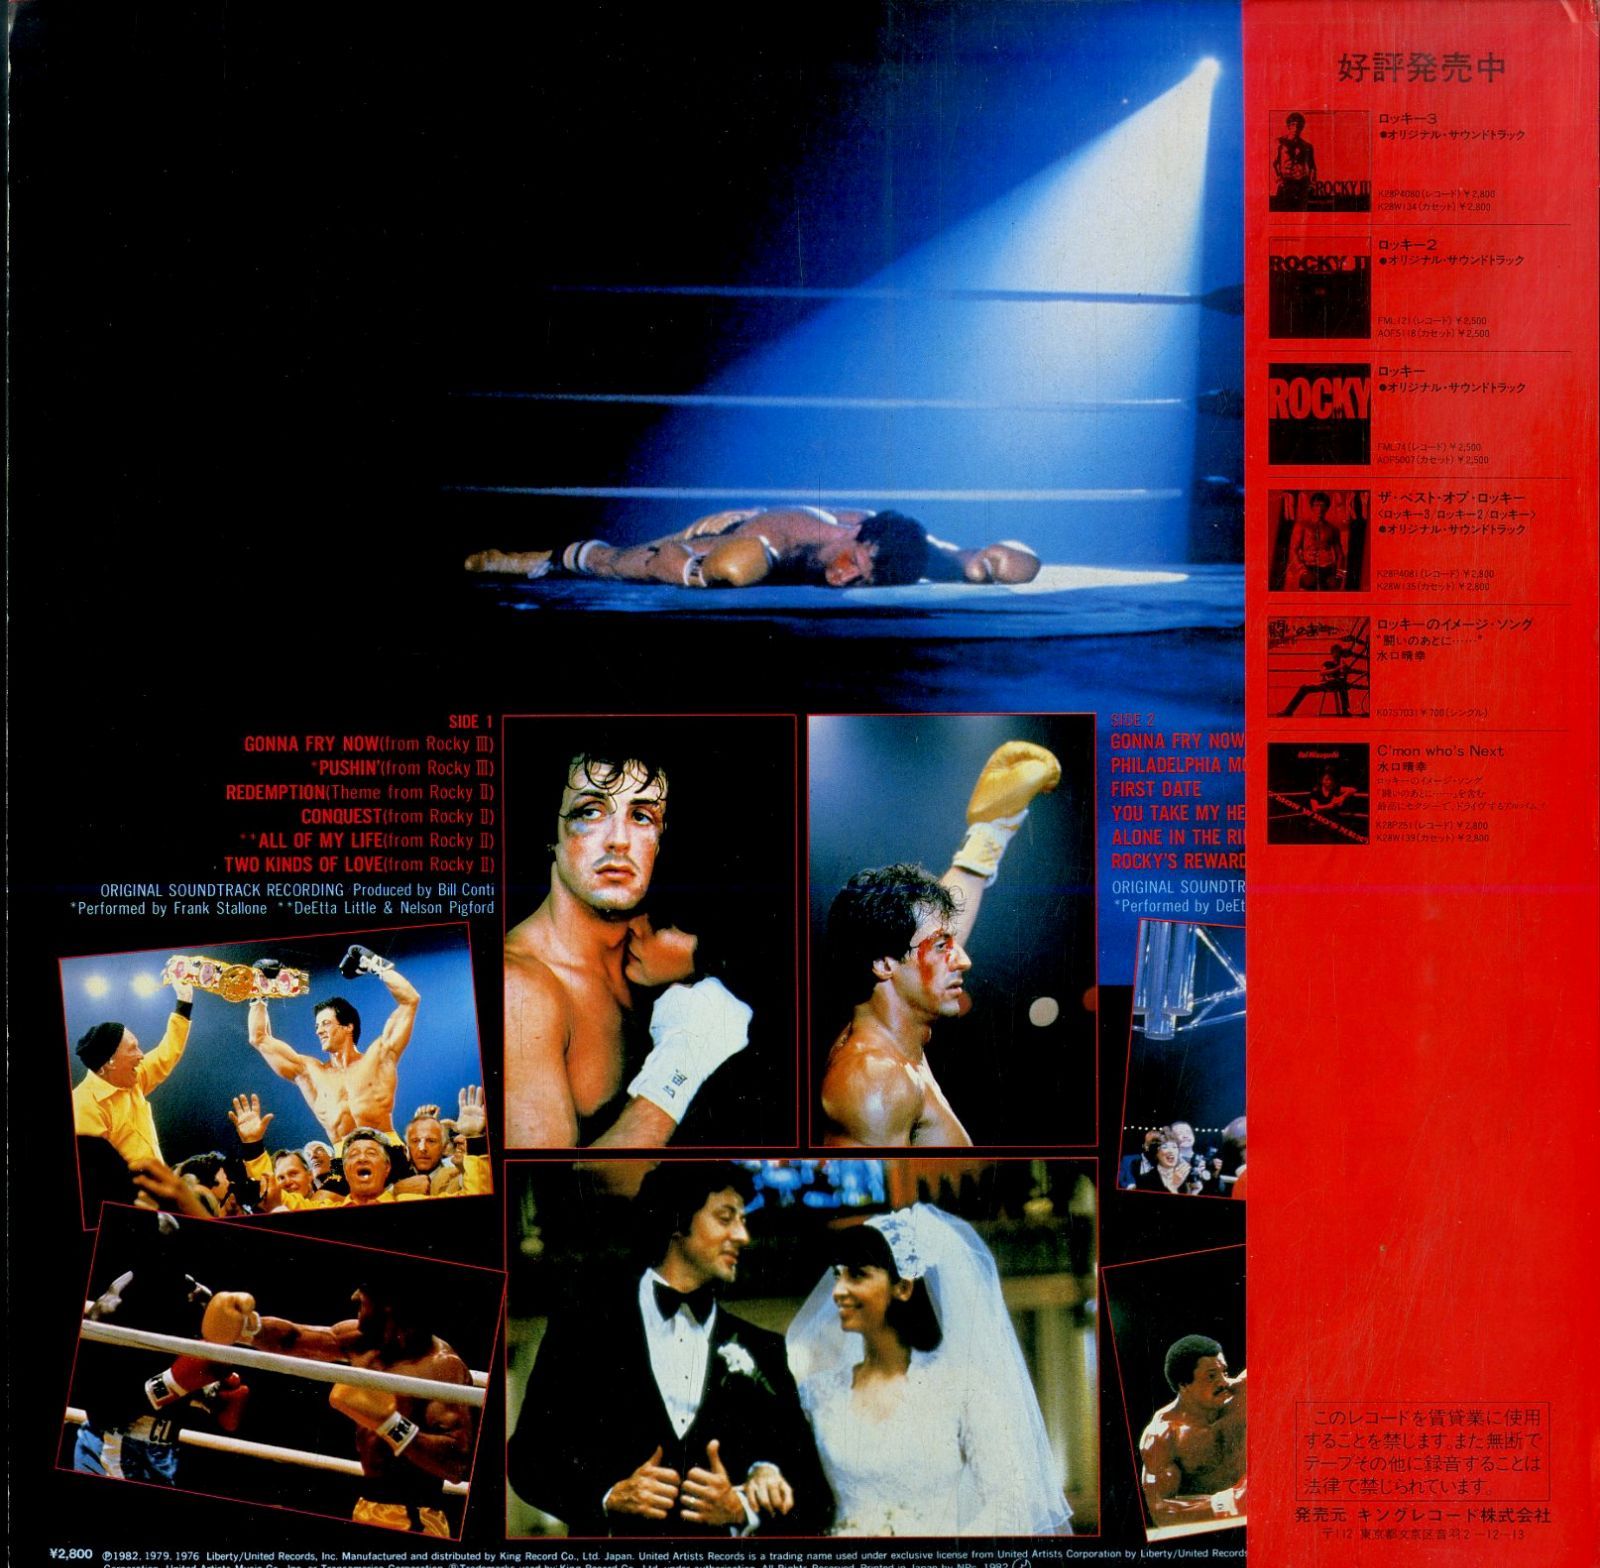 LP1枚 / ビル・コンティ(音楽) / ロッキー The Best Of Rocky OST 